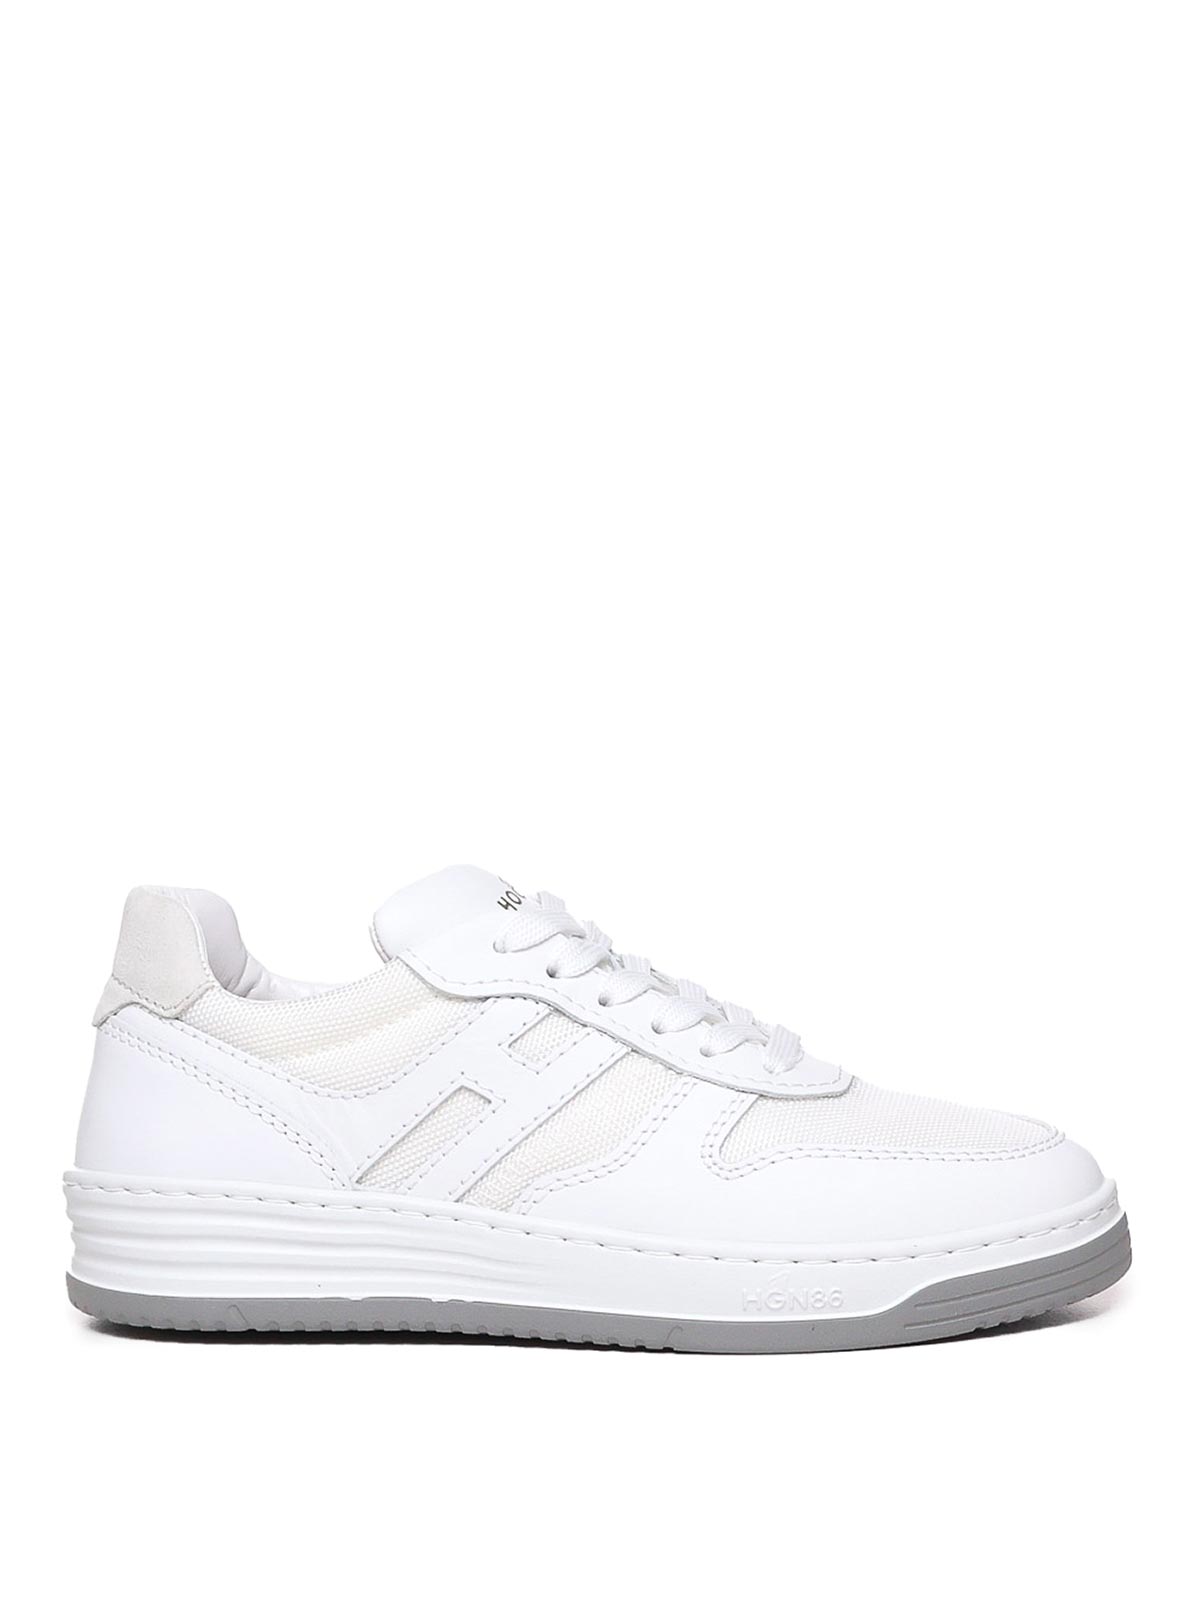 Shop Hogan H630 Sneakers With Insert Design In White